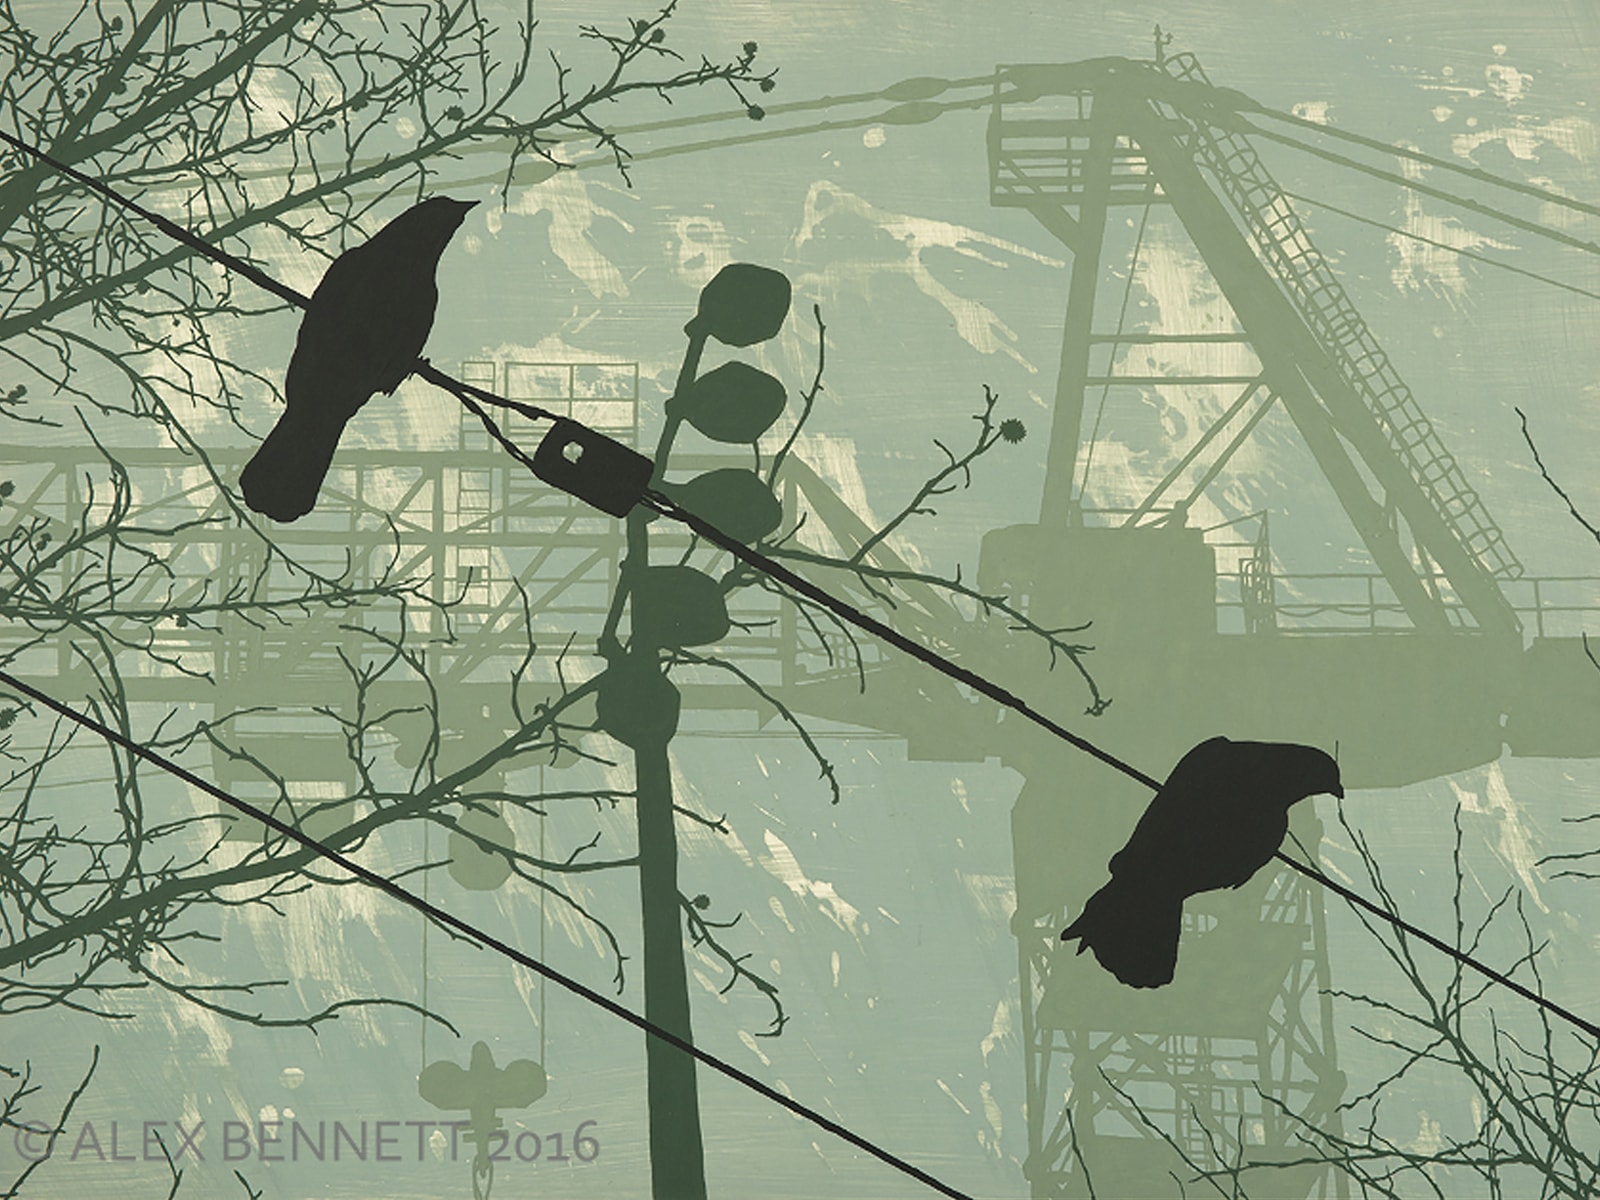 DigiPen MFA student Alex Bennett's painting of crows on a telephone wire with a construction crane in the background